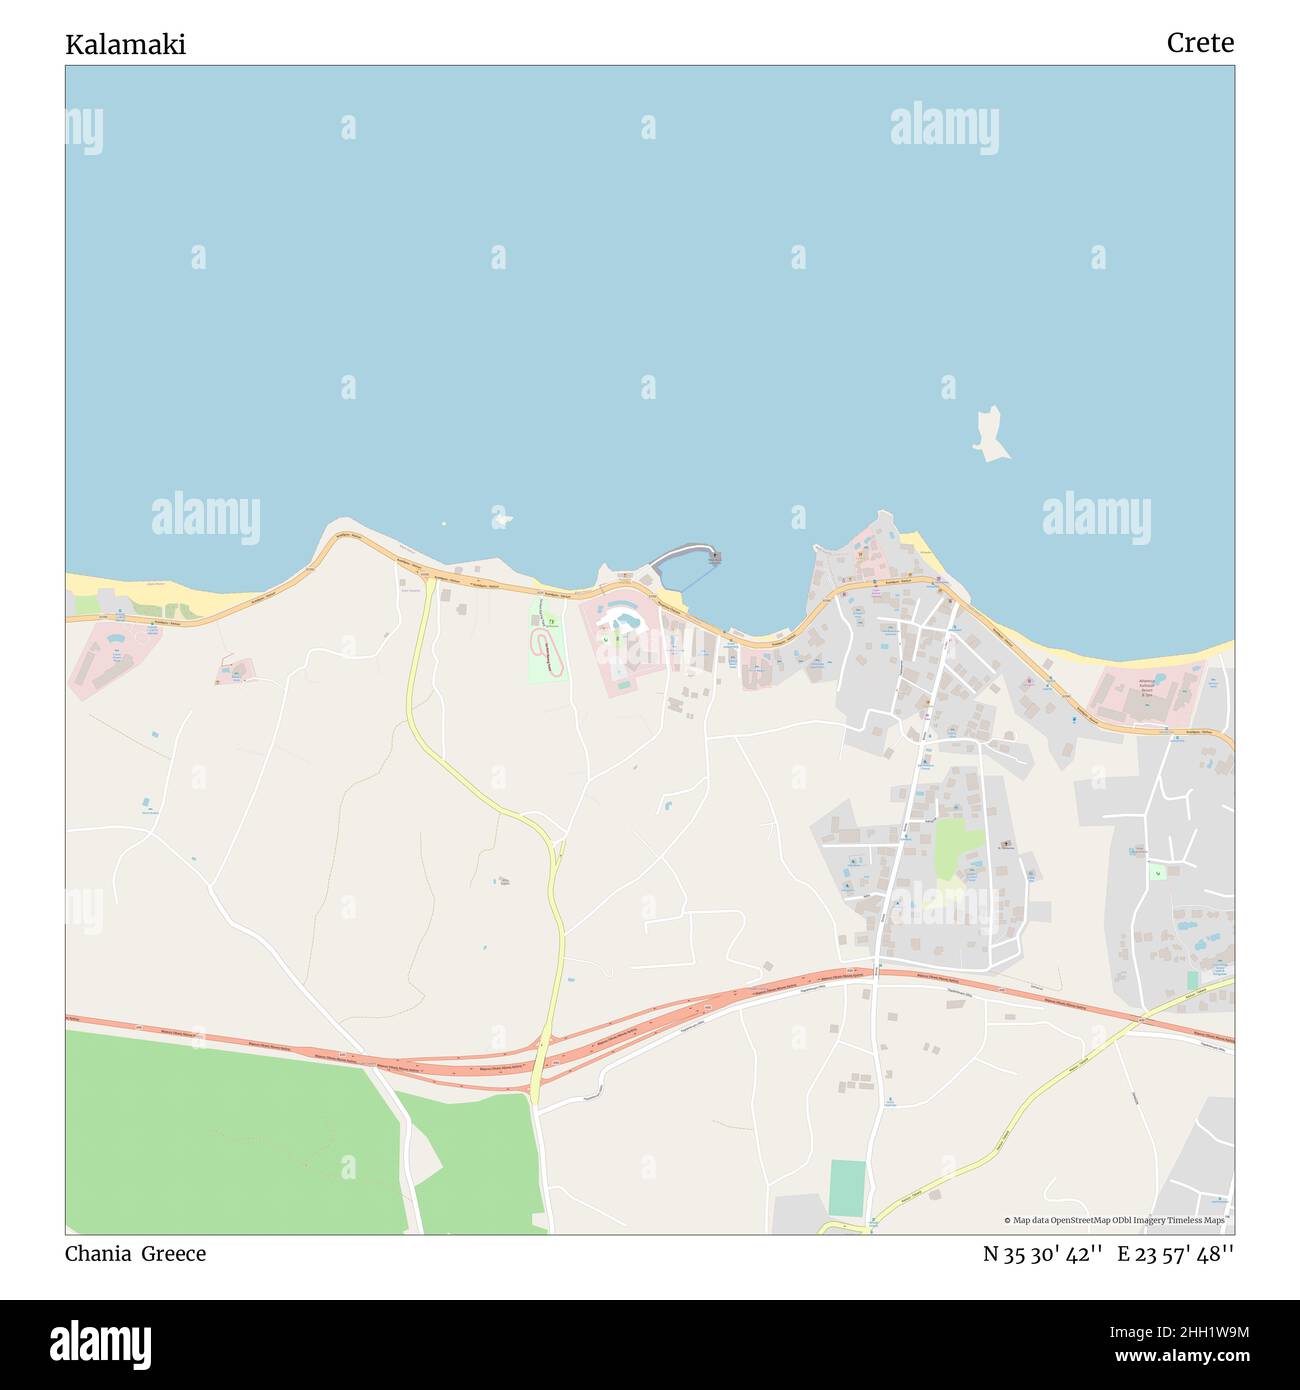 Kalamaki, Chania, Greece, Crete, N 35 30' 42'', E 23 57' 48'', map,  Timeless Map published in 2021. Travelers, explorers and adventurers like  Florence Nightingale, David Livingstone, Ernest Shackleton, Lewis and Clark